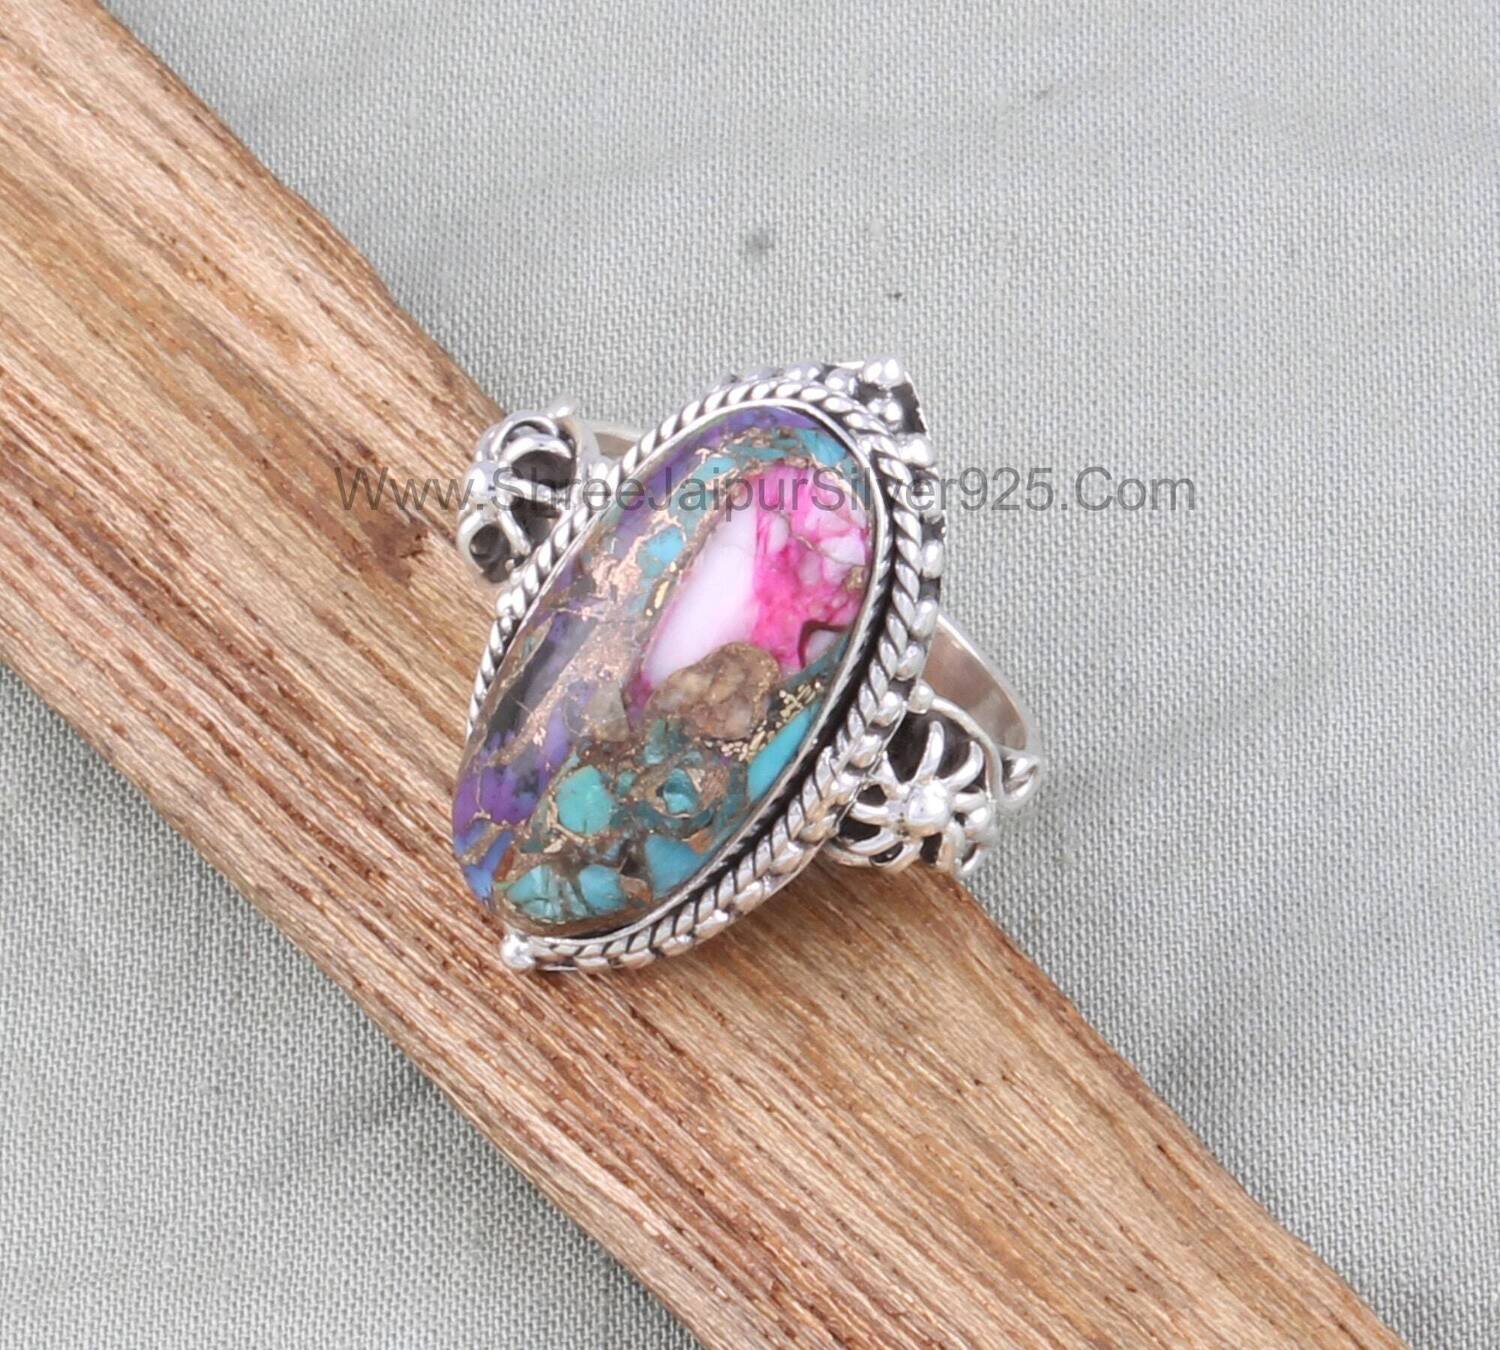 Mix Copper Solid 925 Sterling Silver Ring For Women, Flower Design Silver Ring Handmade Oval Gemstone Ring For Wedding Anniversary Gift Idea